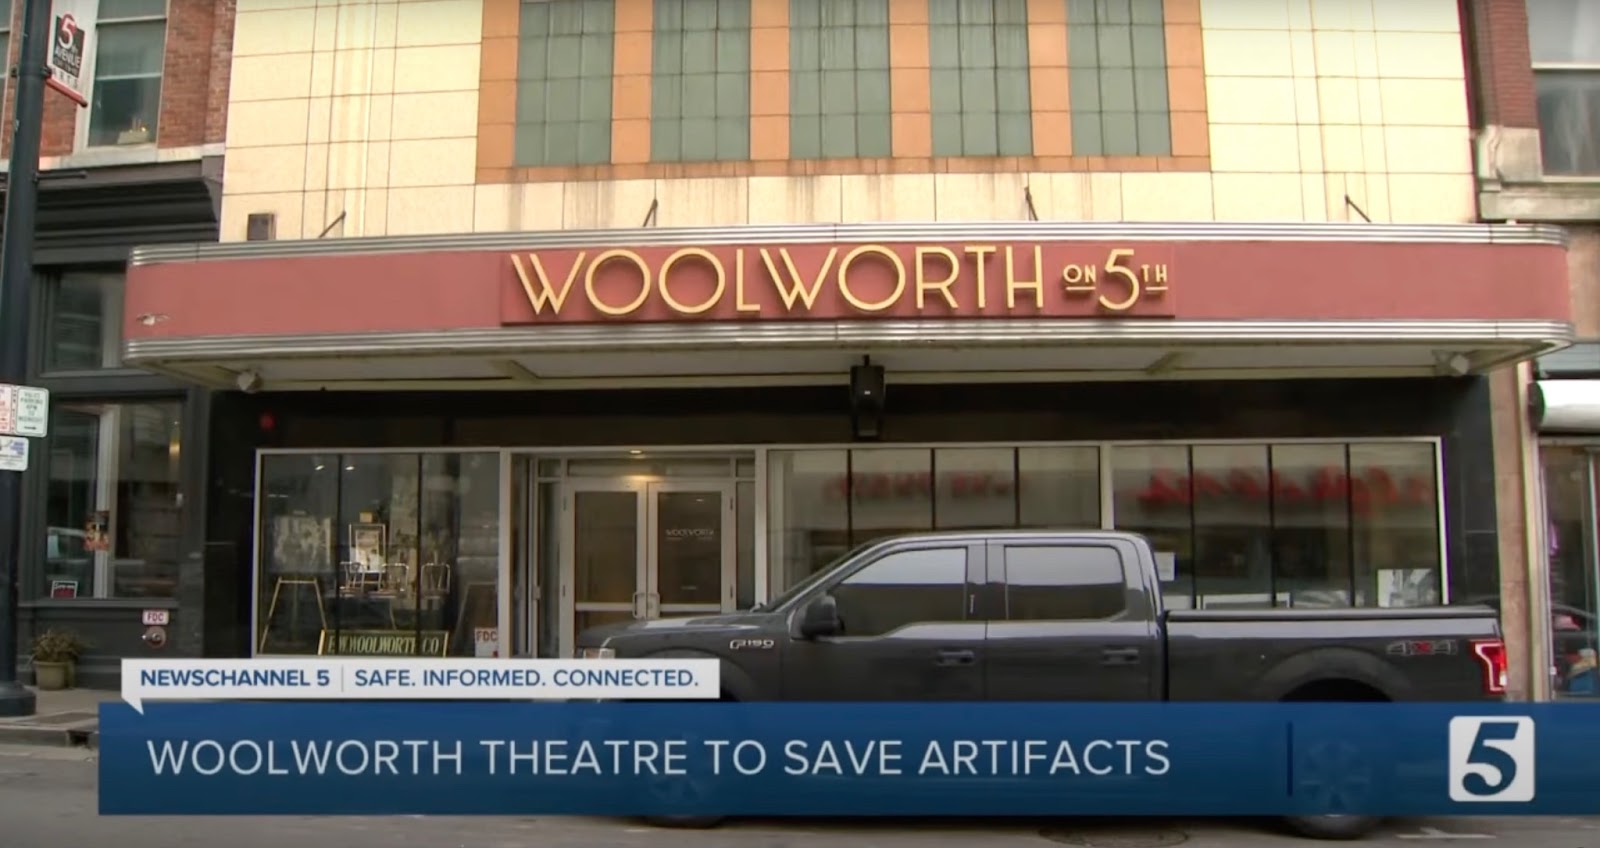 Nashville’s Woolworth Building into a Thriving Theater